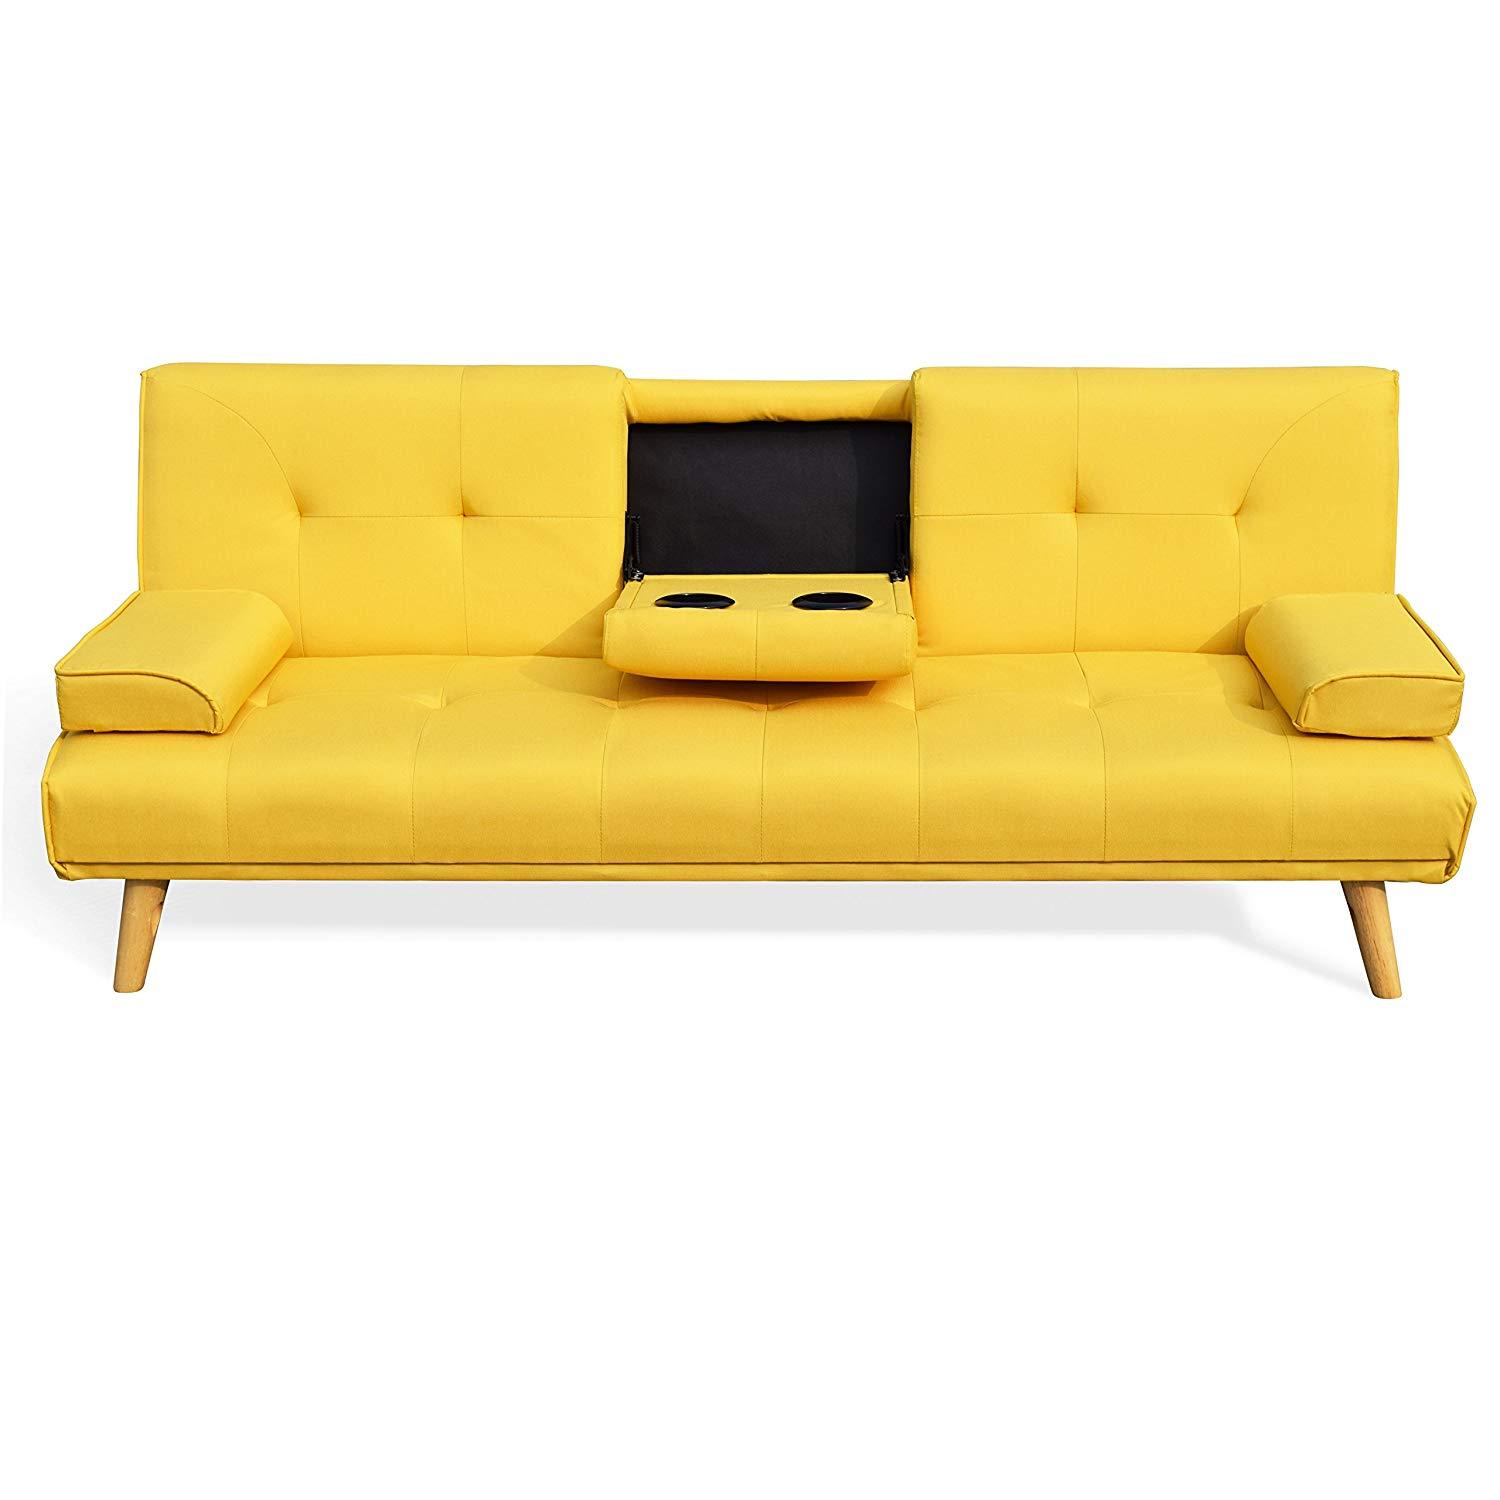 ACRUX 3-Seater Sofa Bed with Cup Holders & Cushions, Yellow Fabric